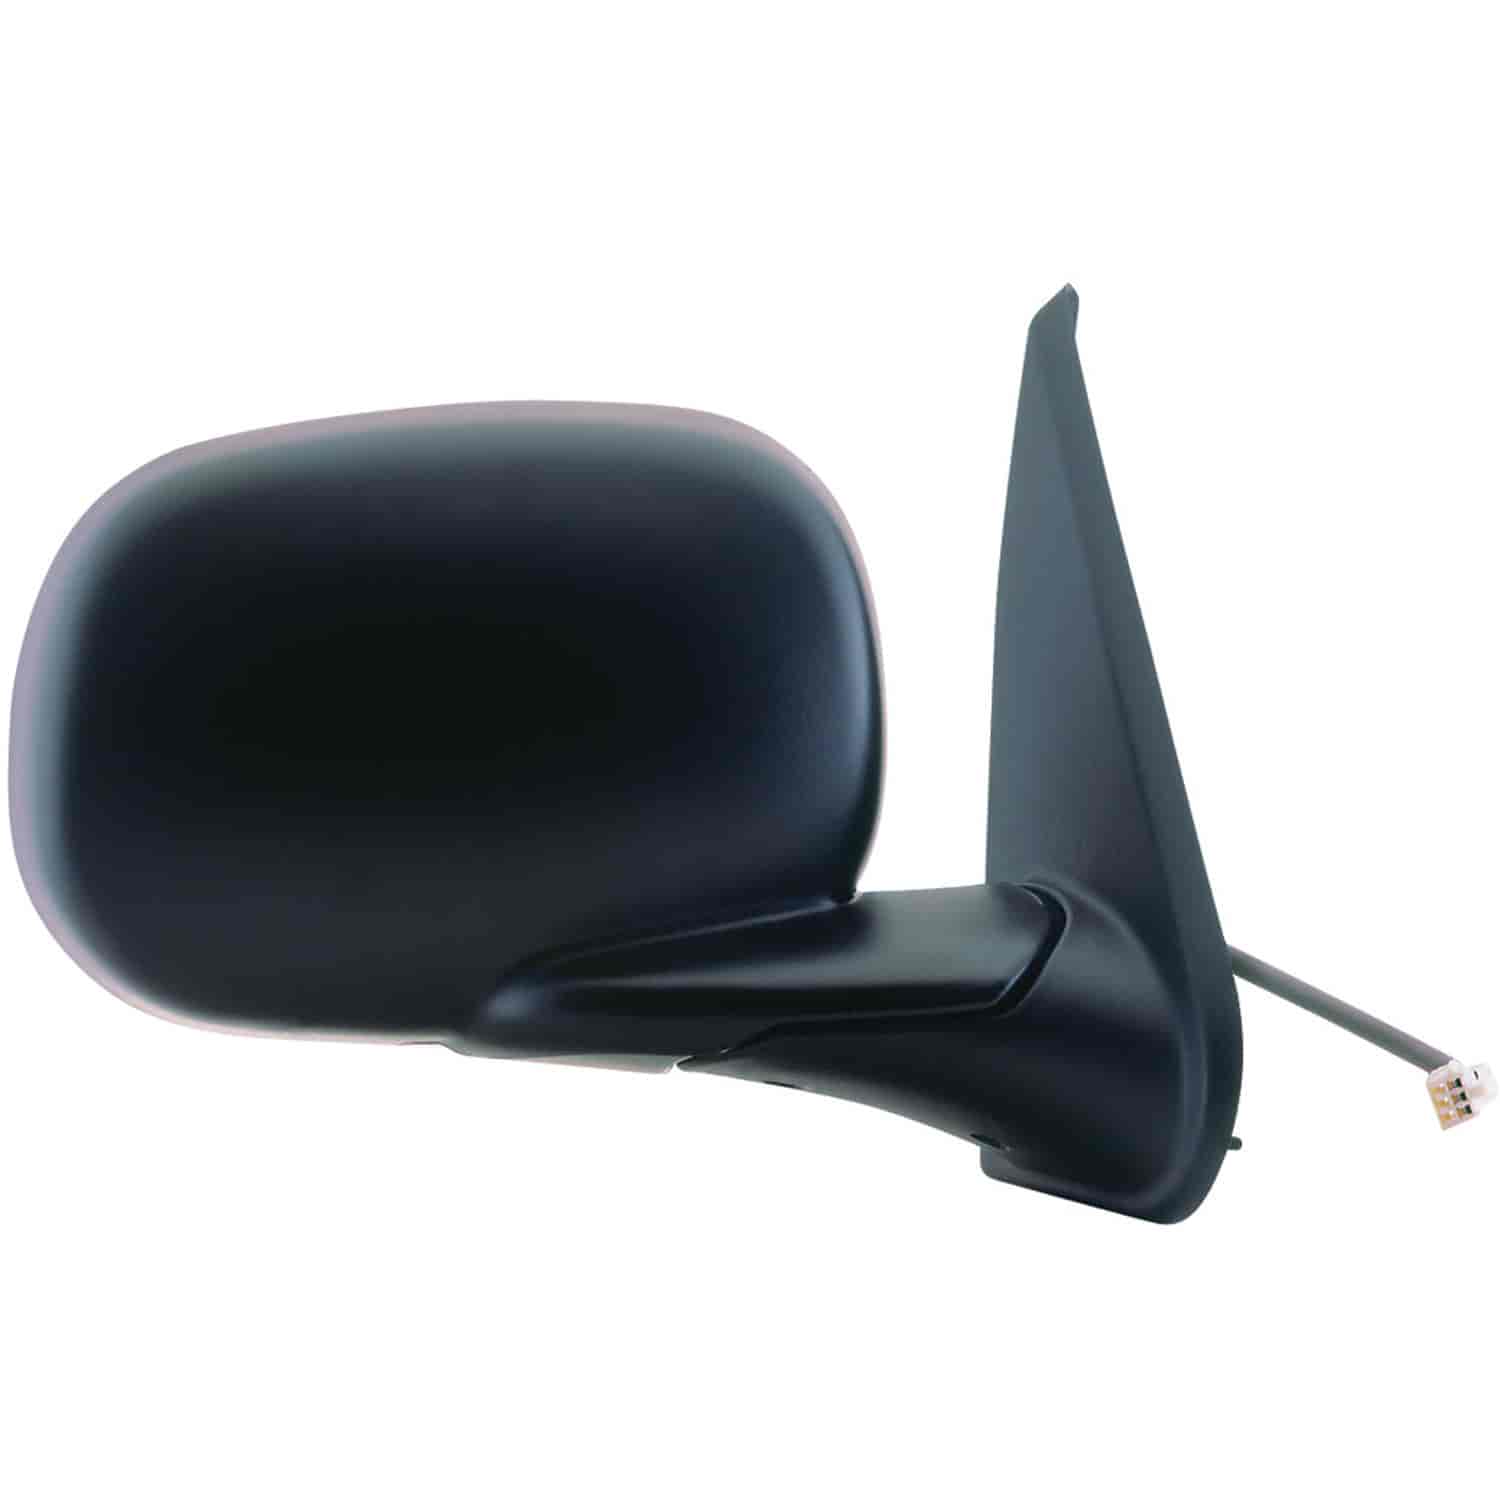 OEM Style Replacement mirror for 98-01 Dodge Full Size Van passenger side mirror tested to fit and f